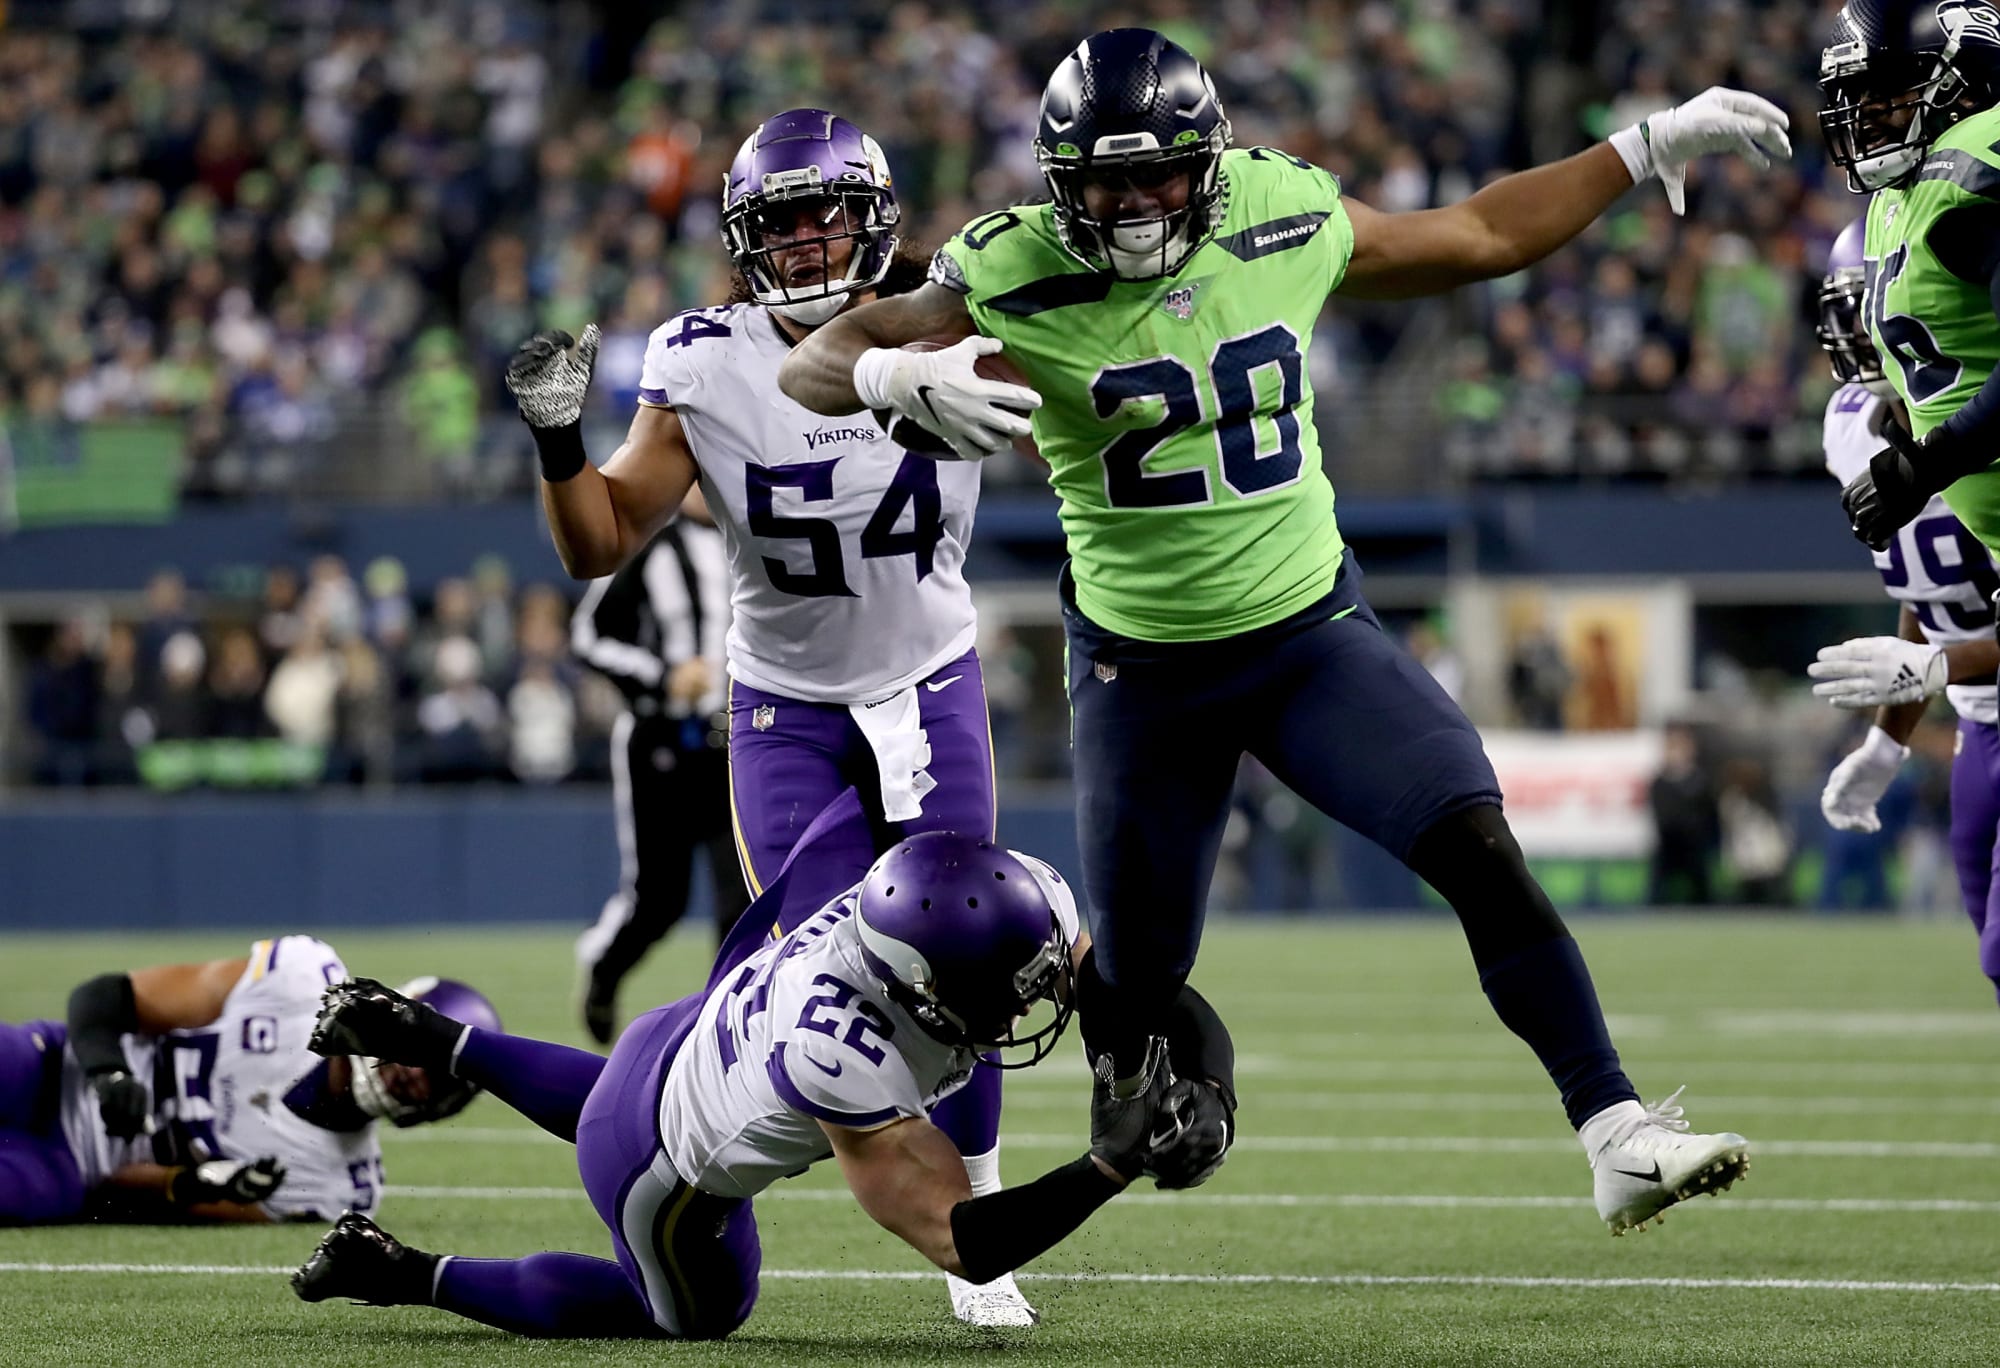 Seahawks defeat the Vikings in a game closer than it should have been